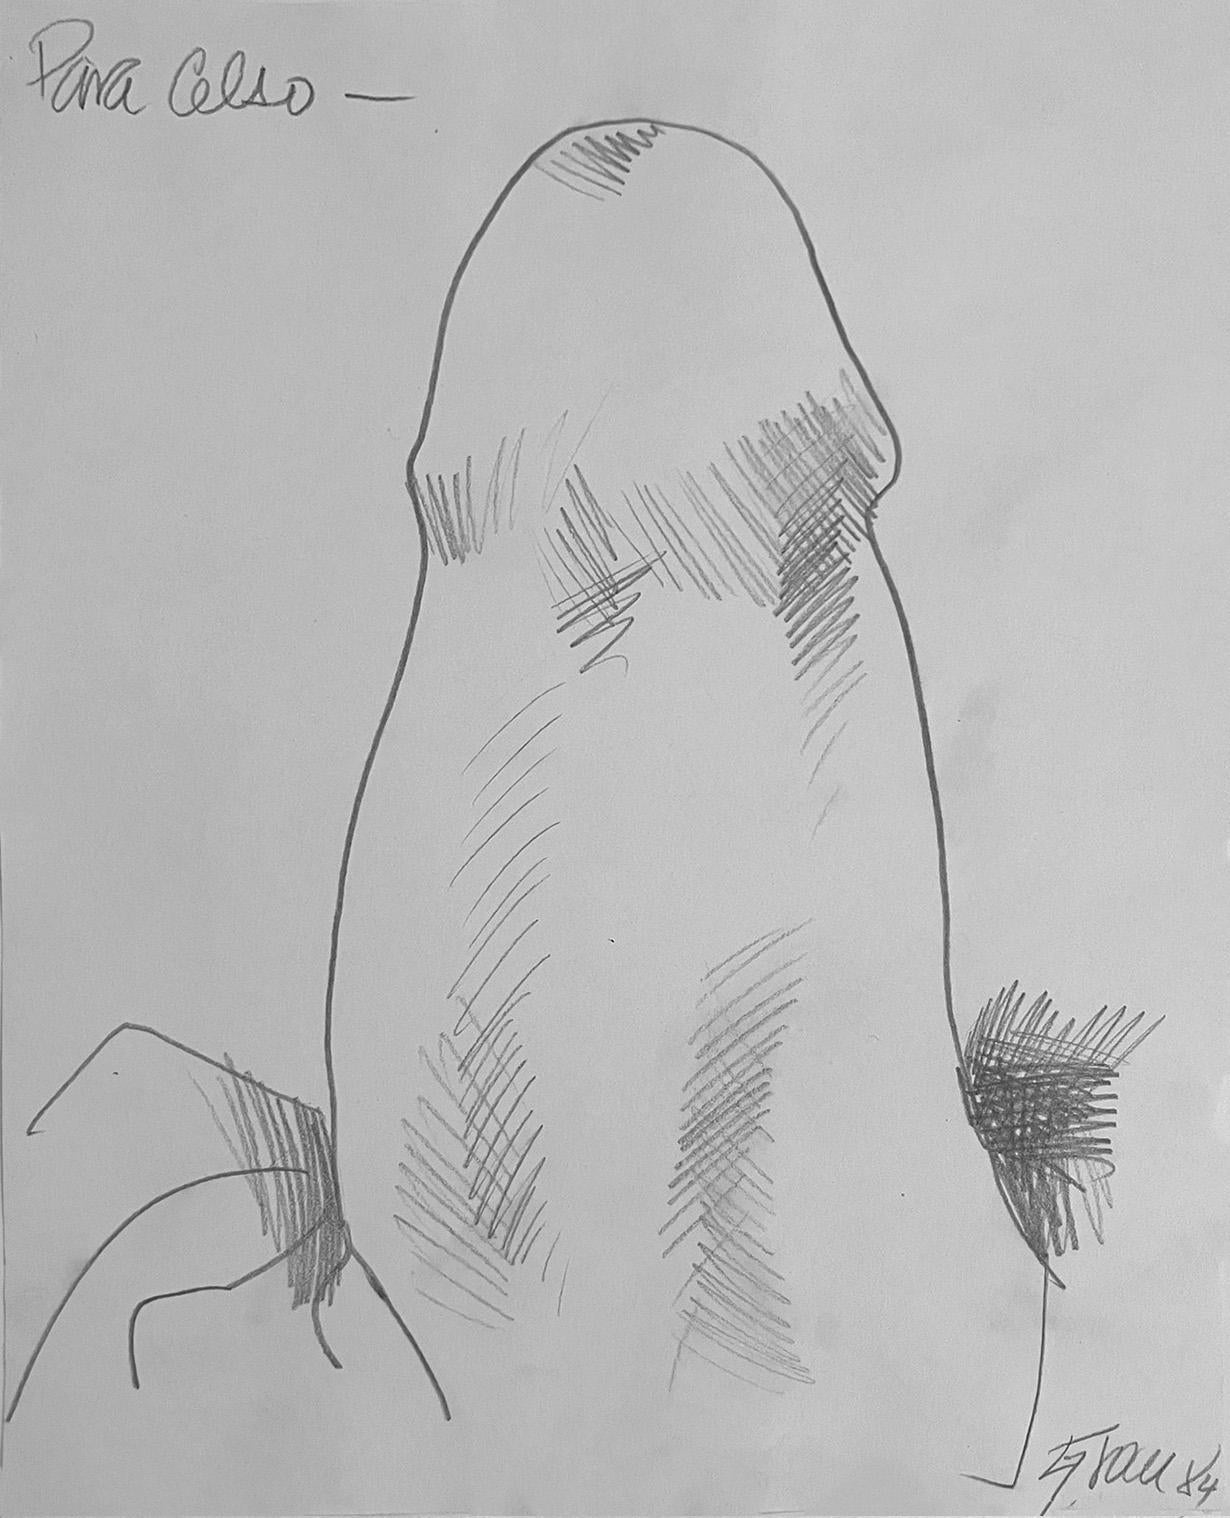 Untitled III, Nude drawing on paper